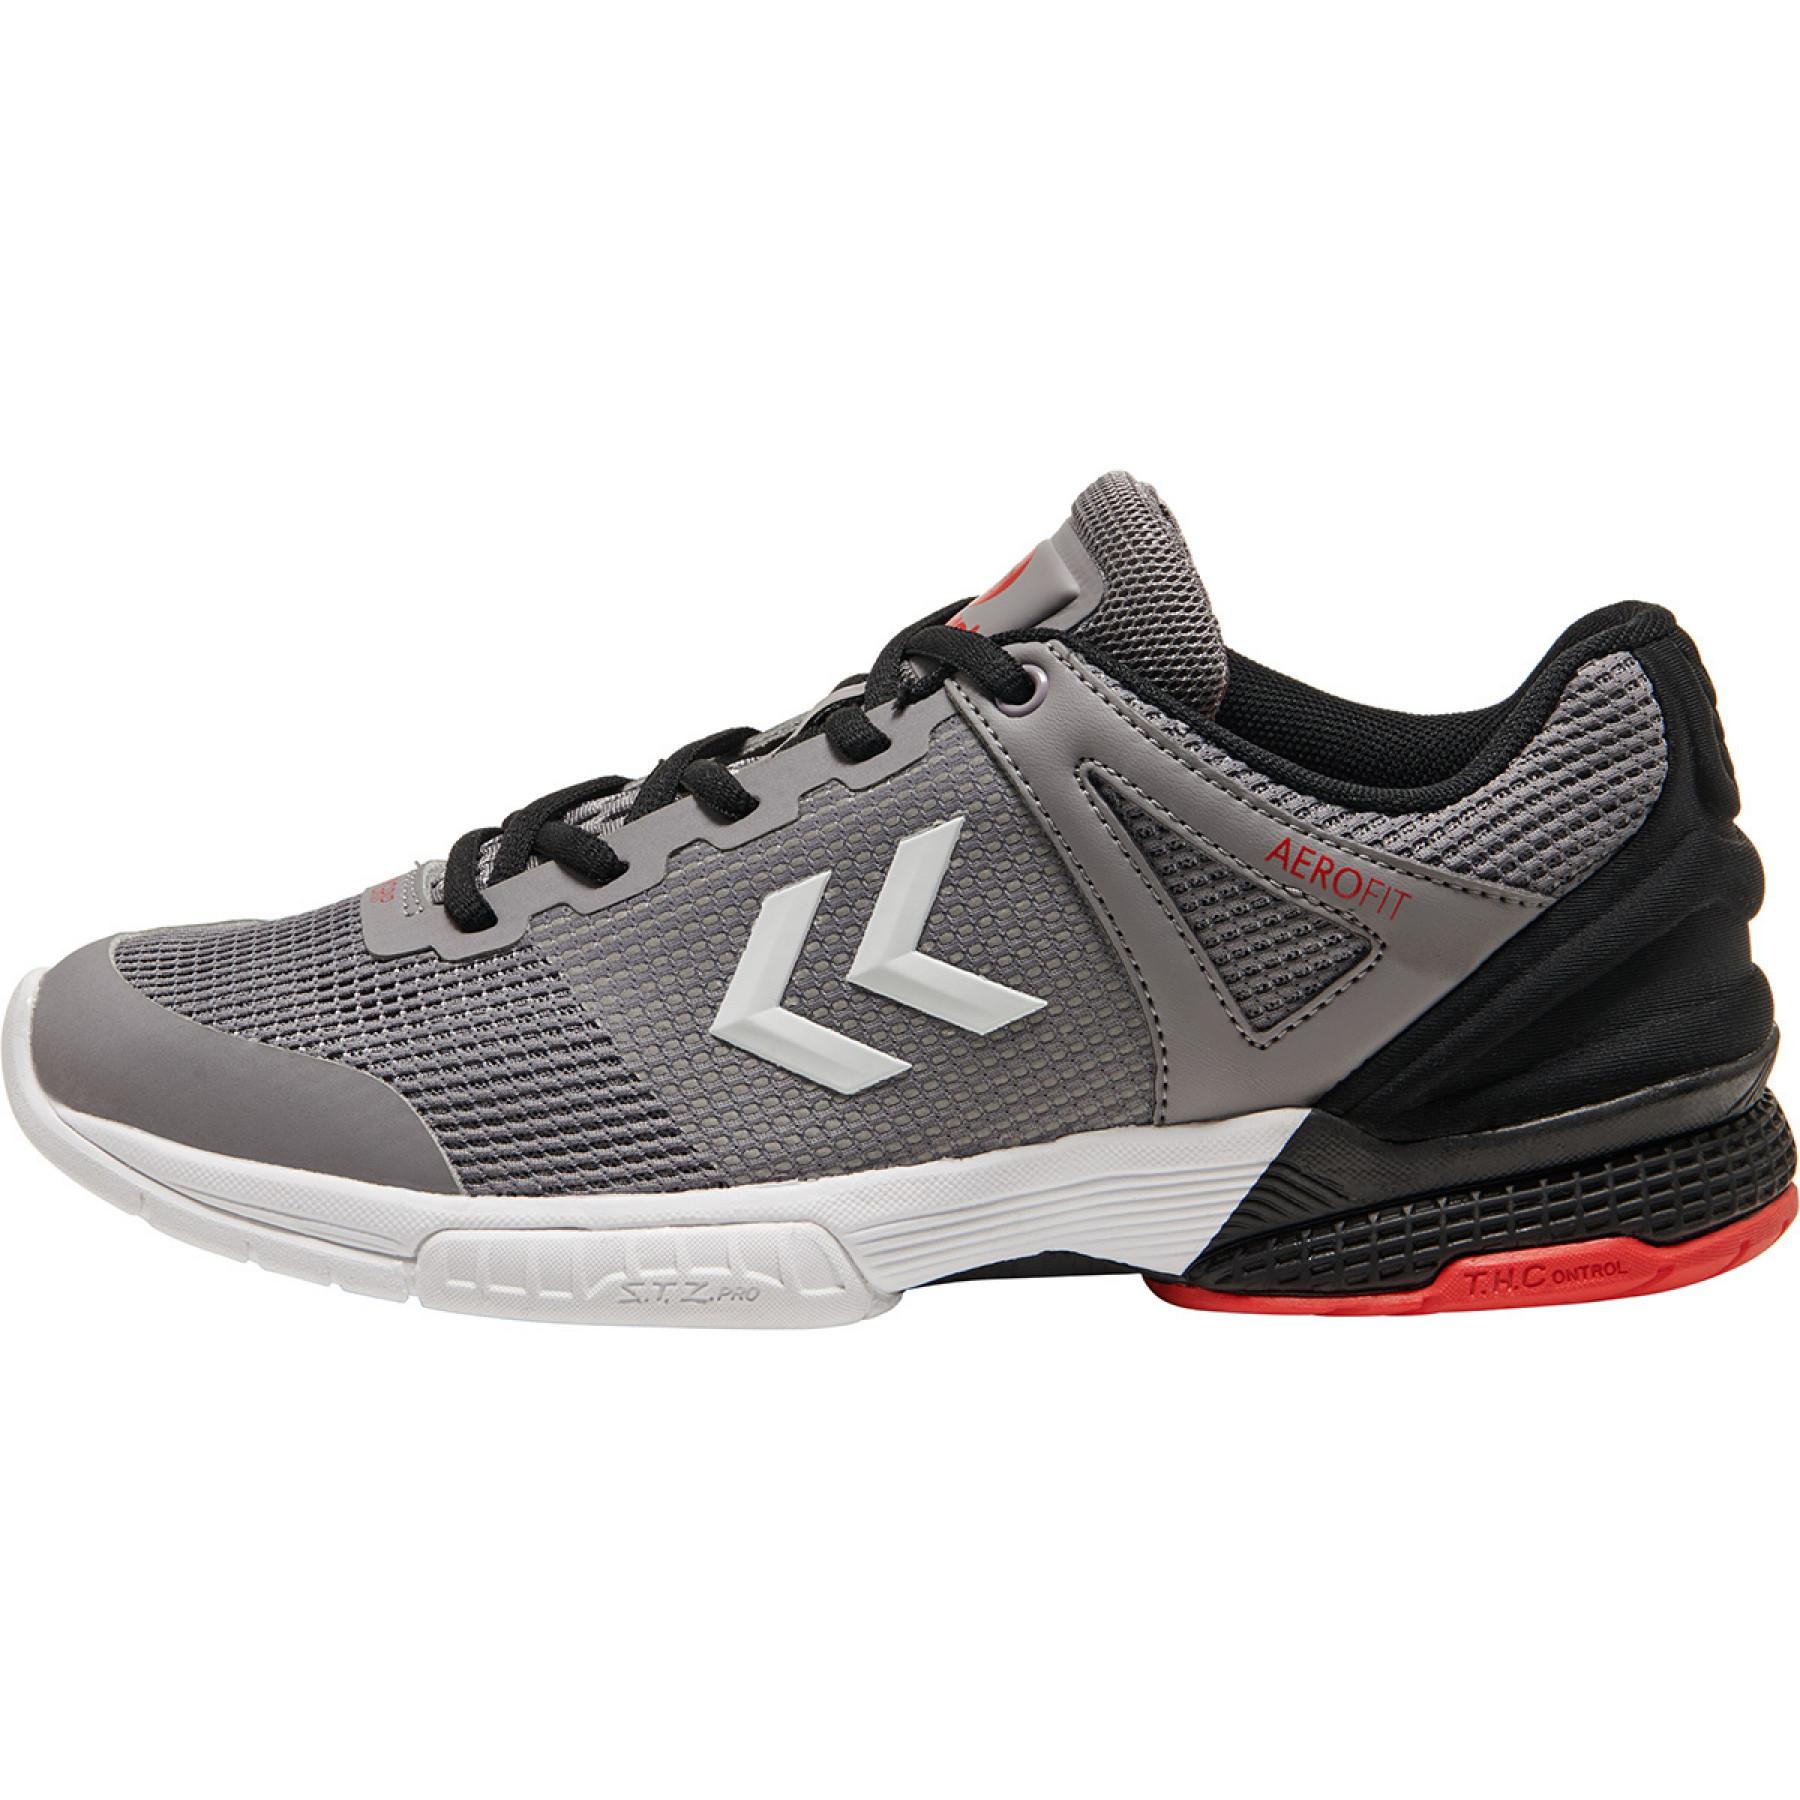 Zapatos Hummel Aerocharge Hb180 Rely 3.0 Trophy